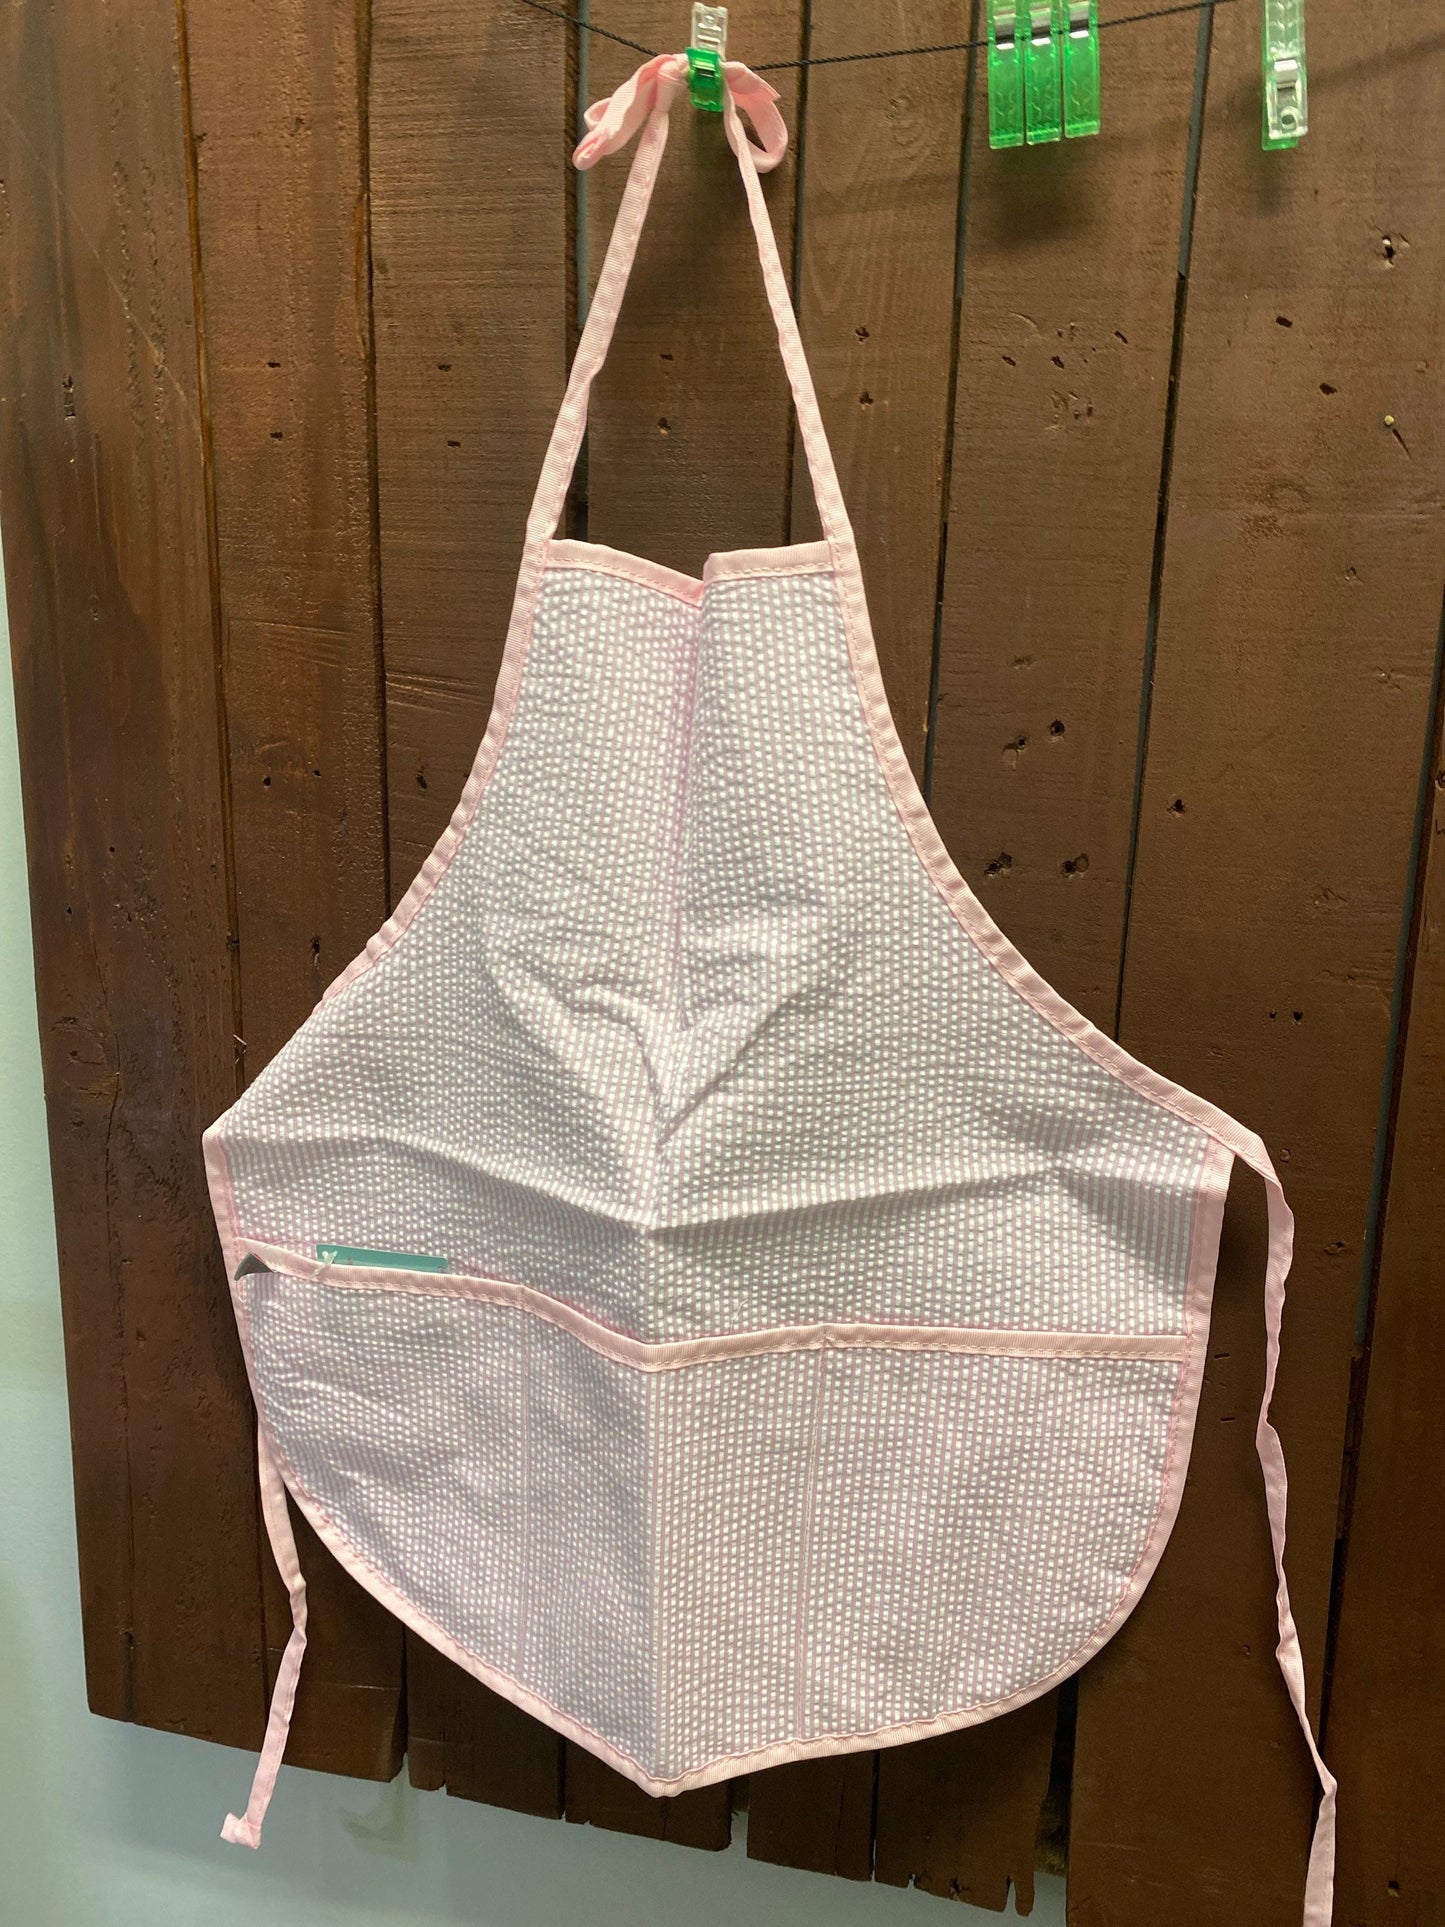 Aprons for cooking or arts/crafts